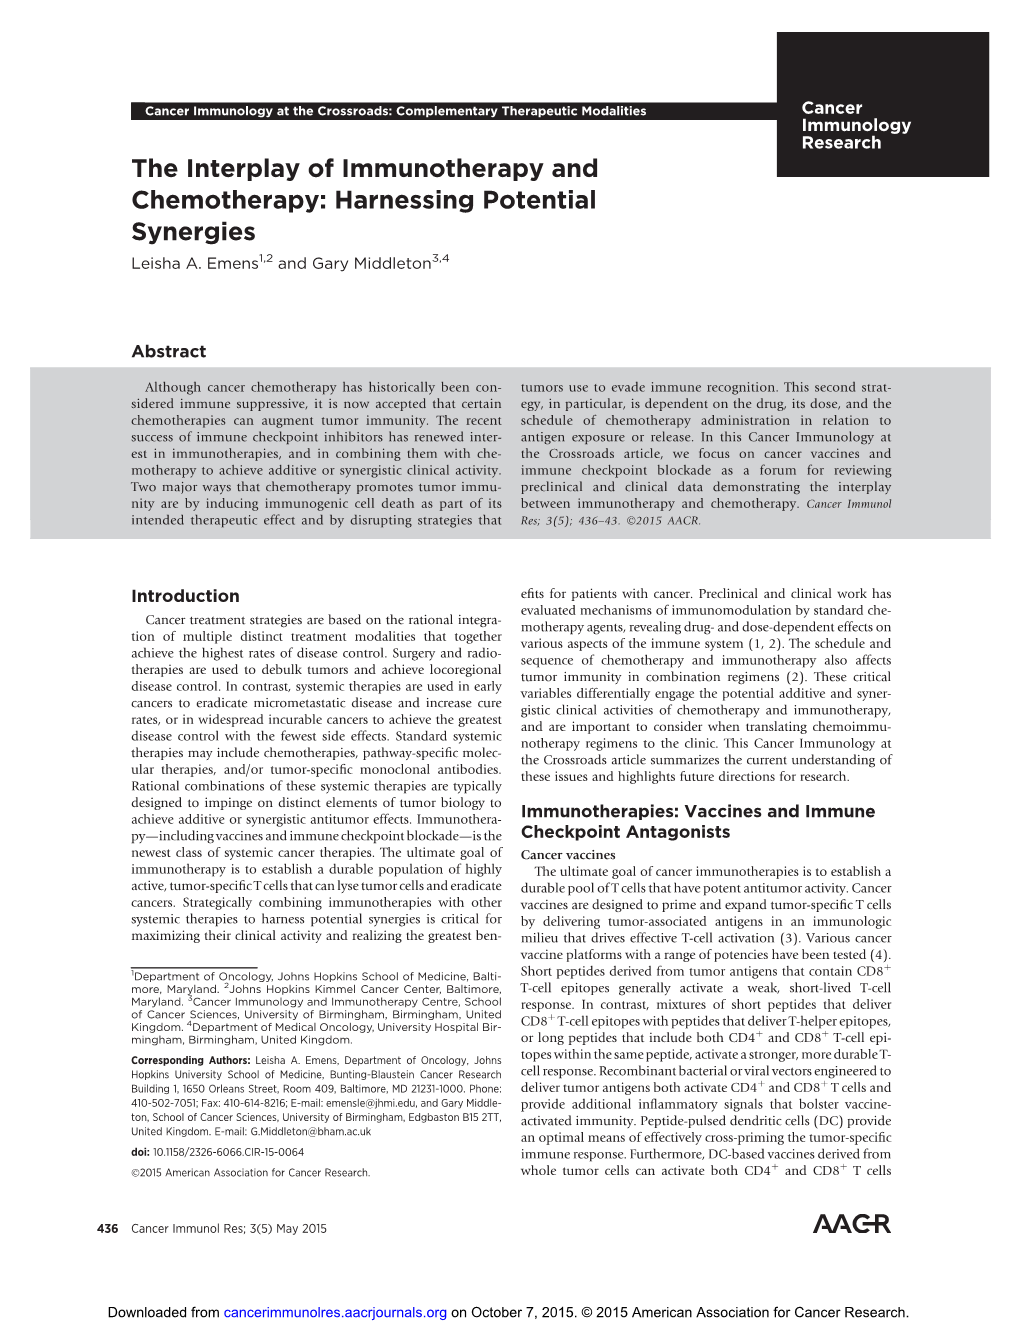 The Interplay of Immunotherapy and Chemotherapy: Harnessing Potential Synergies Leisha A